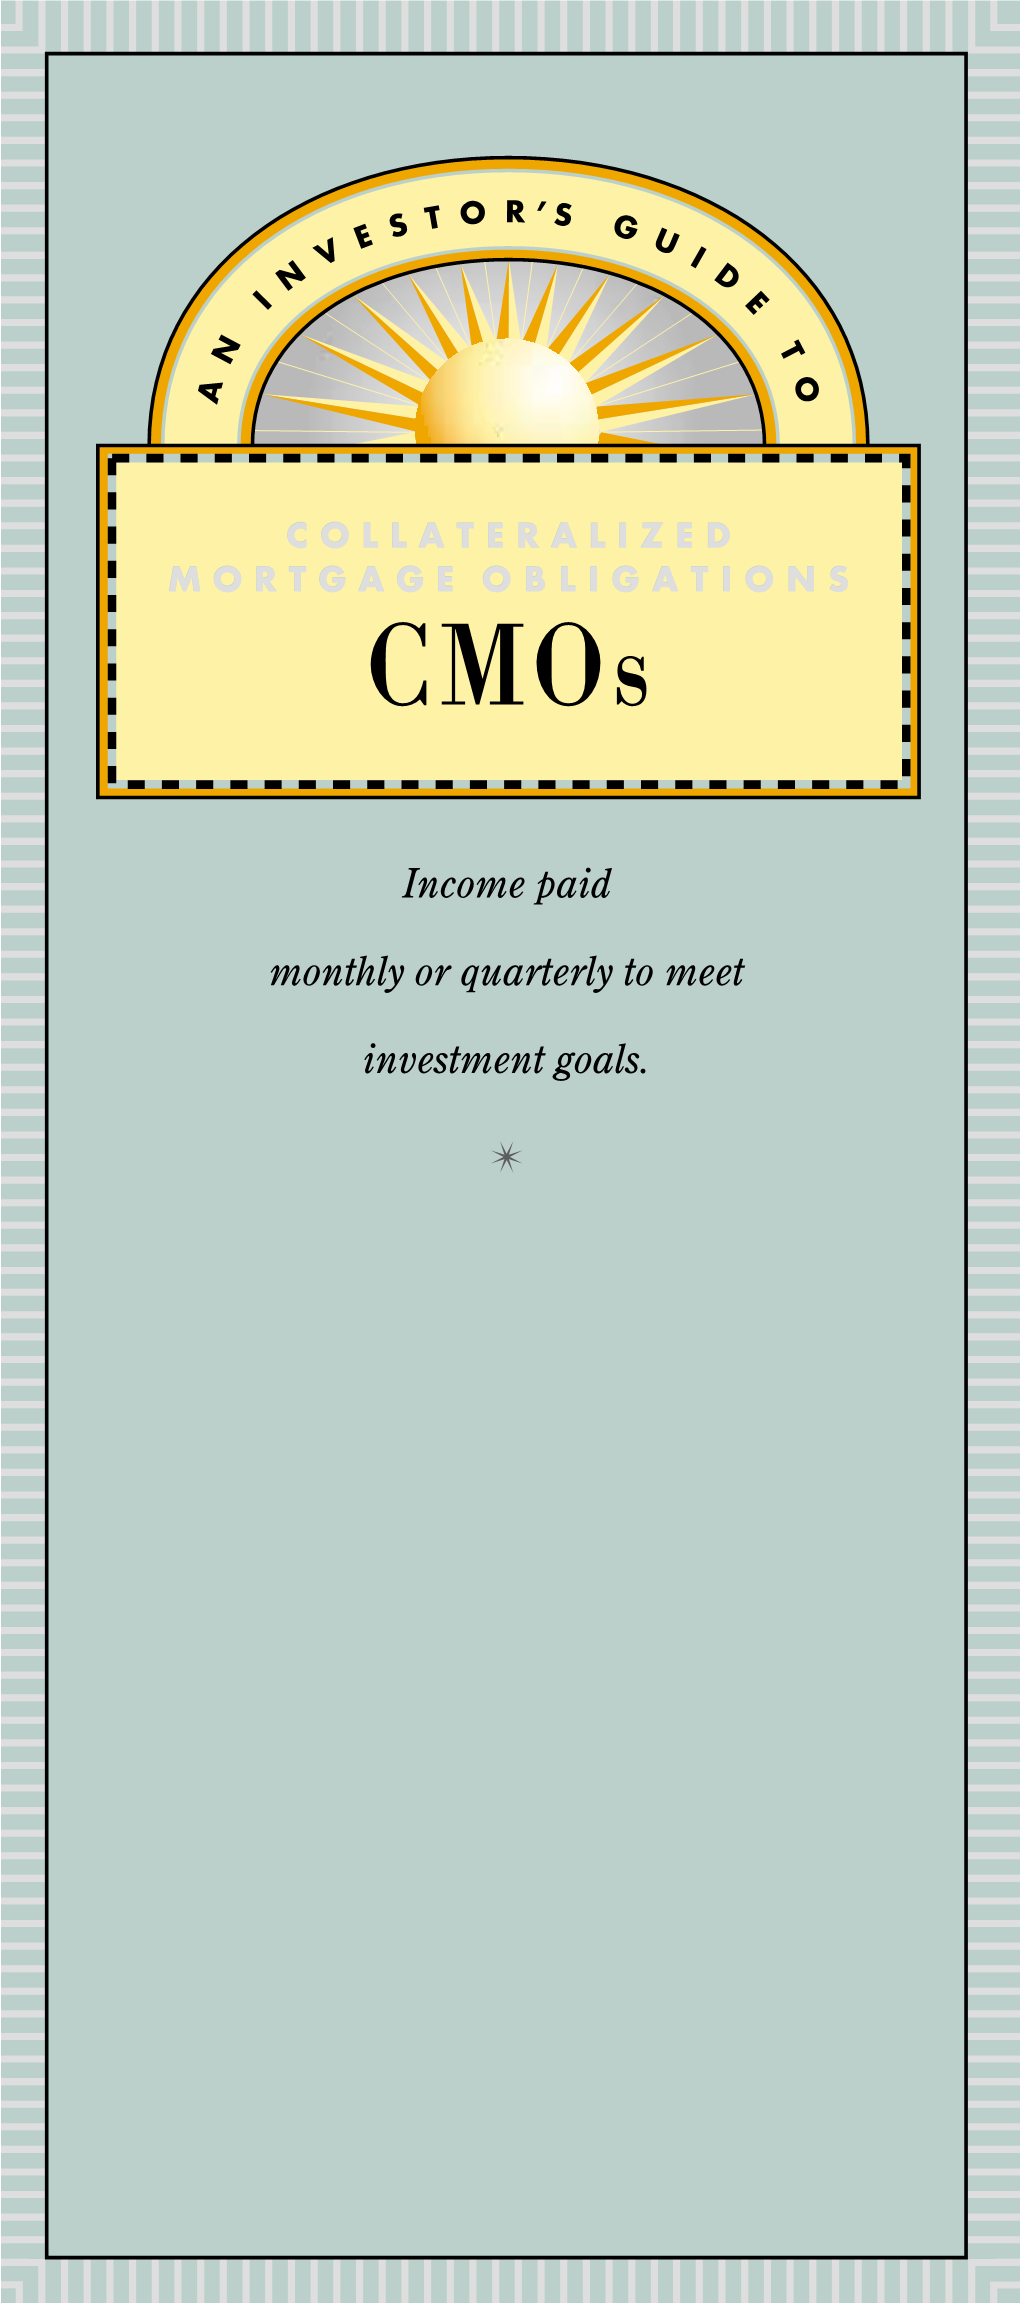 An Investor's Guide to Cmos